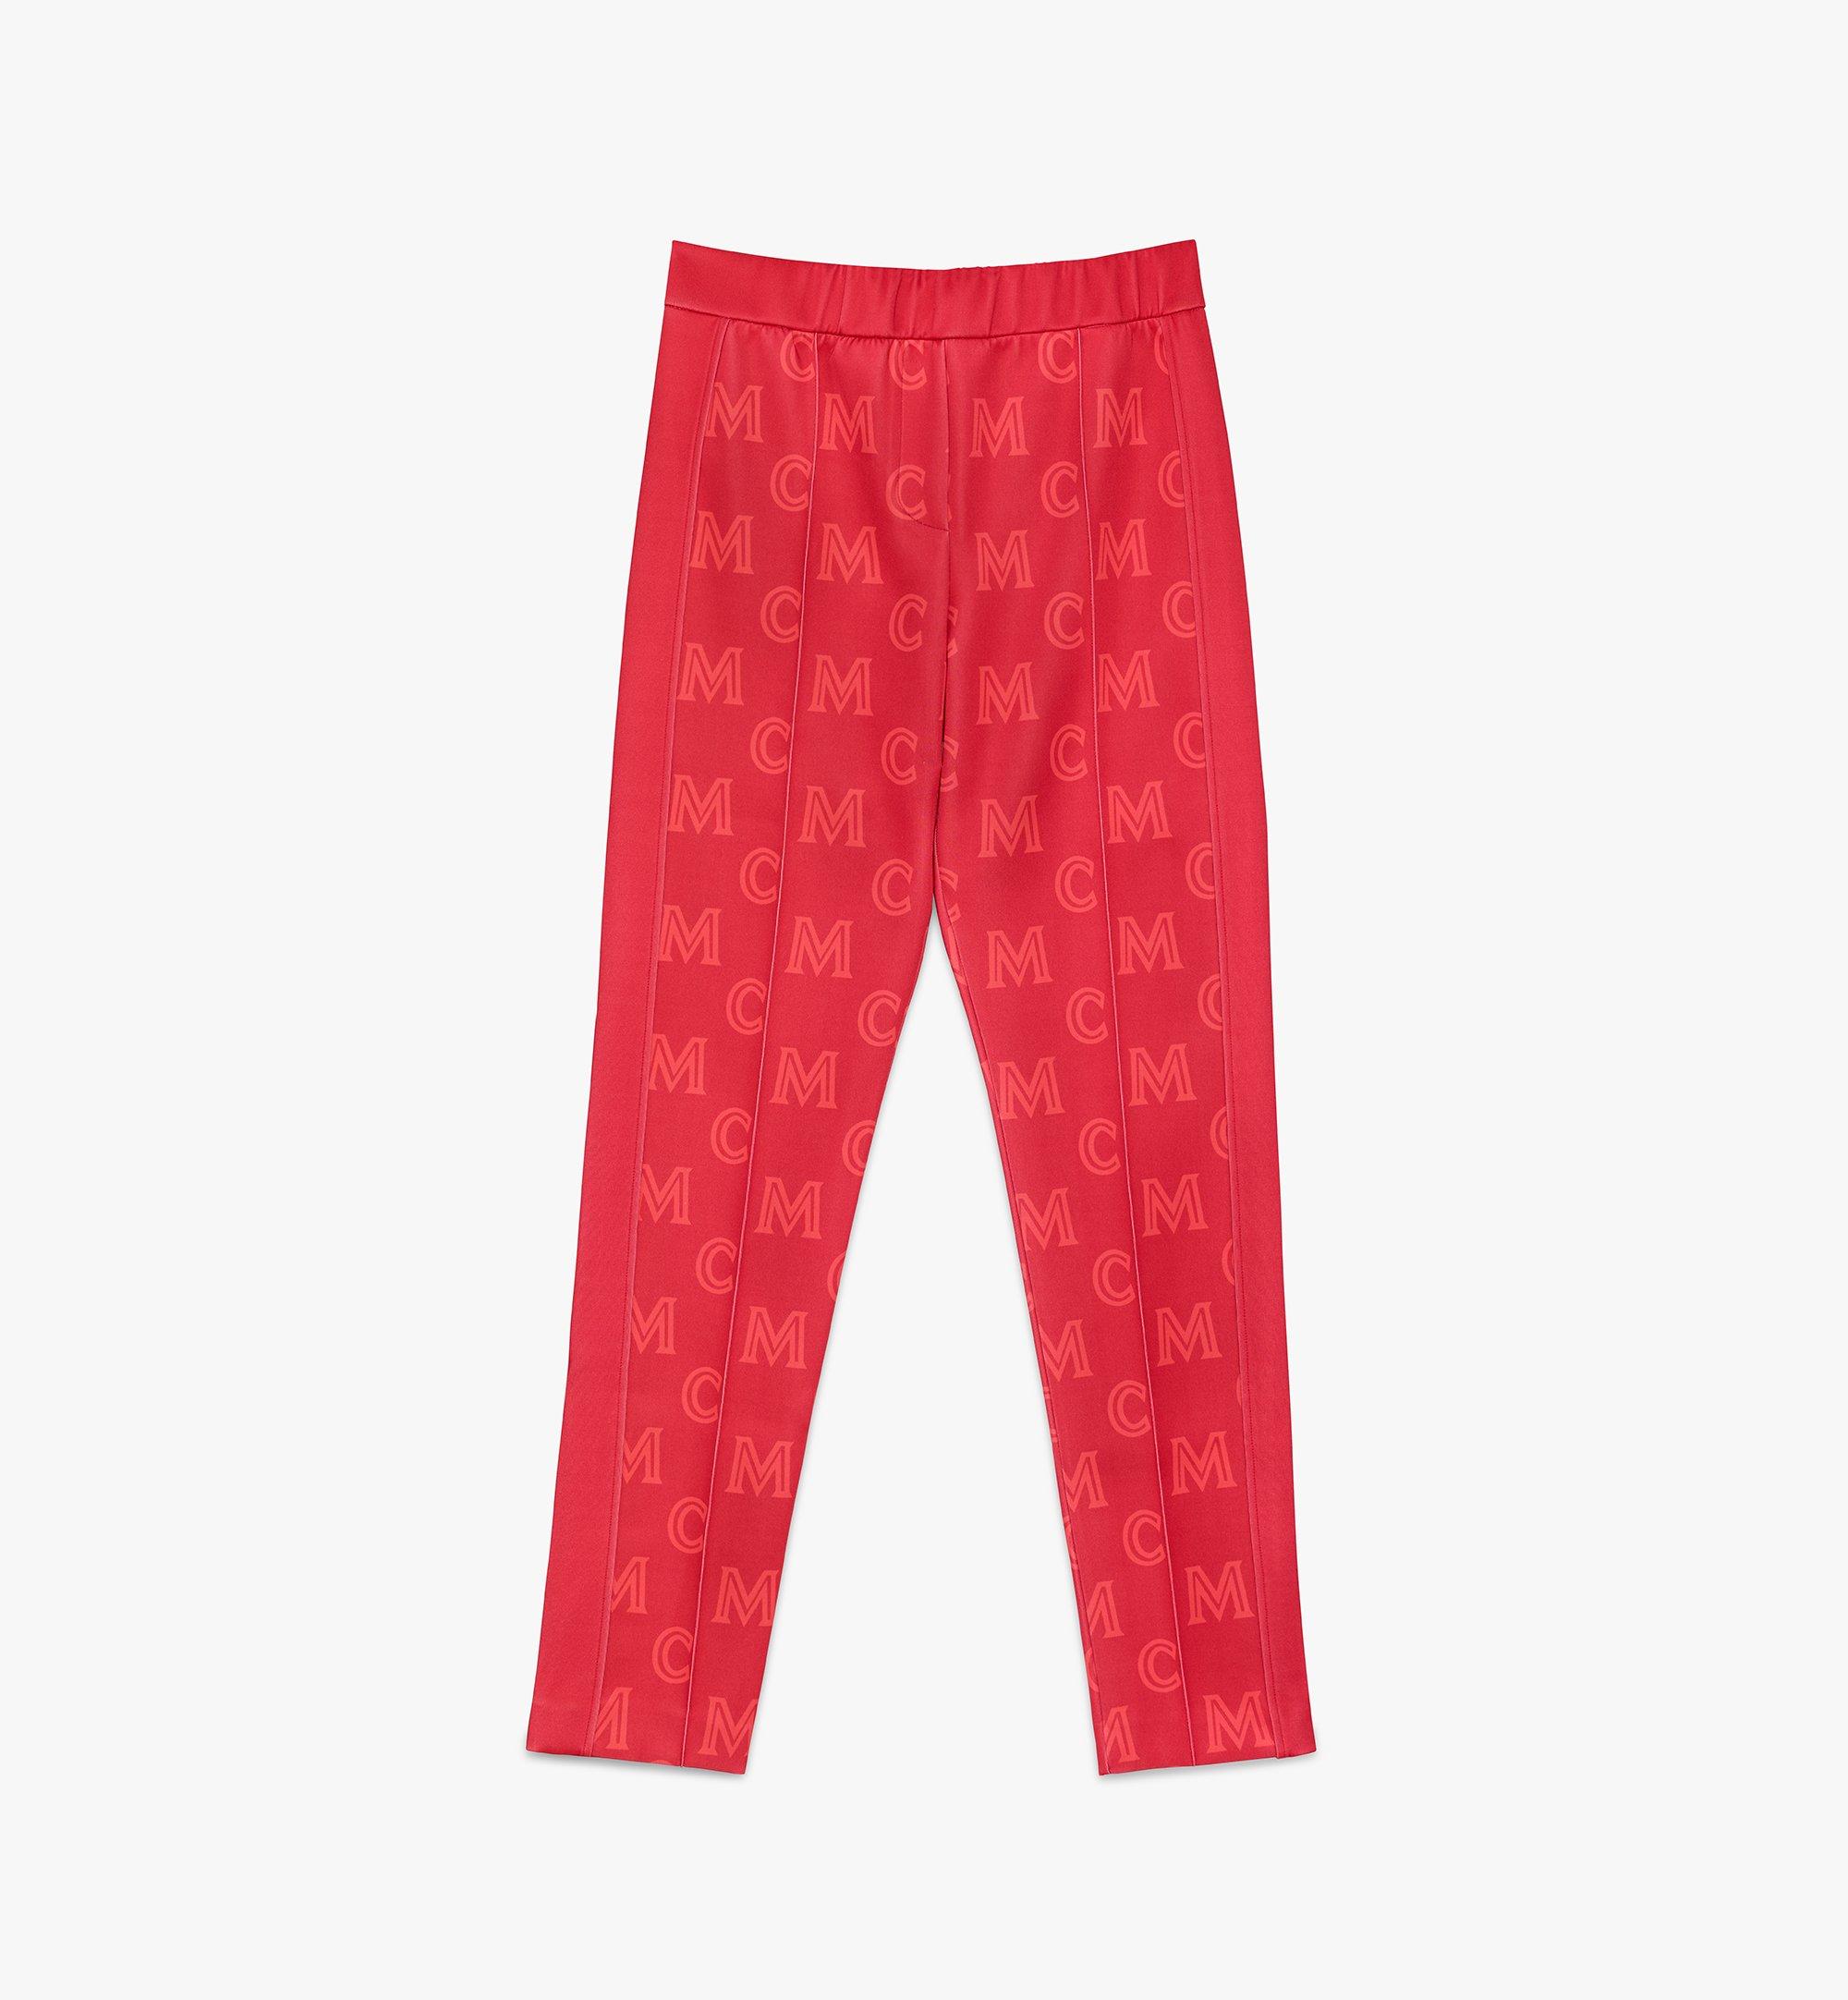 red track pants womens